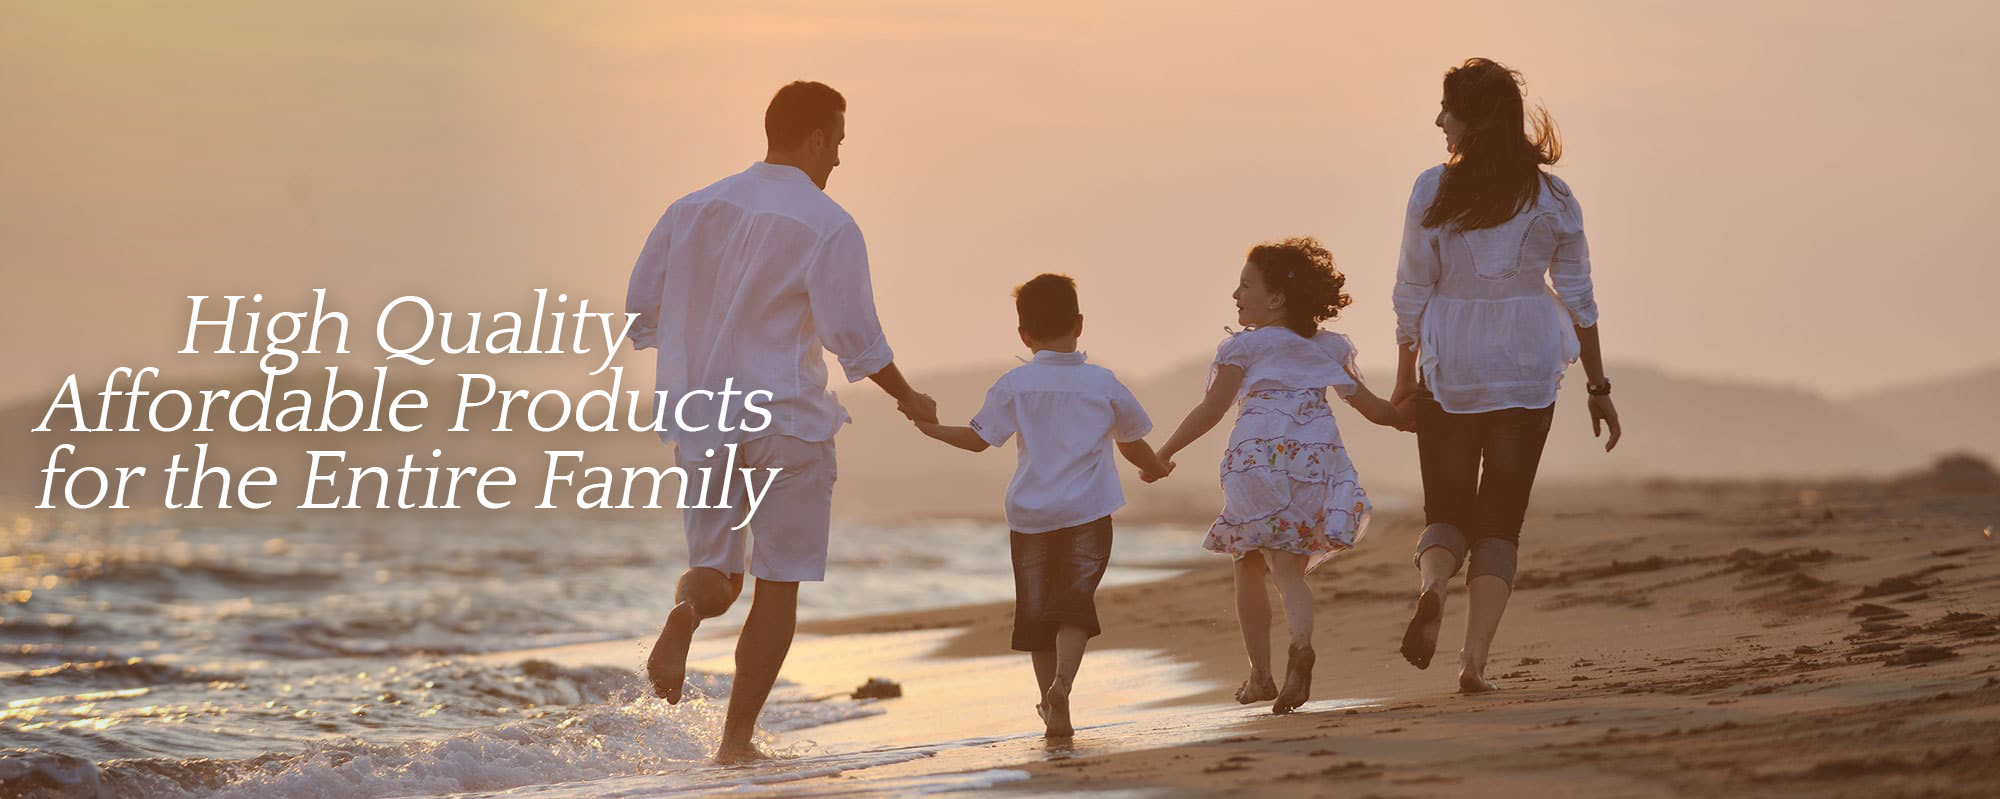 High quality affordable products for the entire family